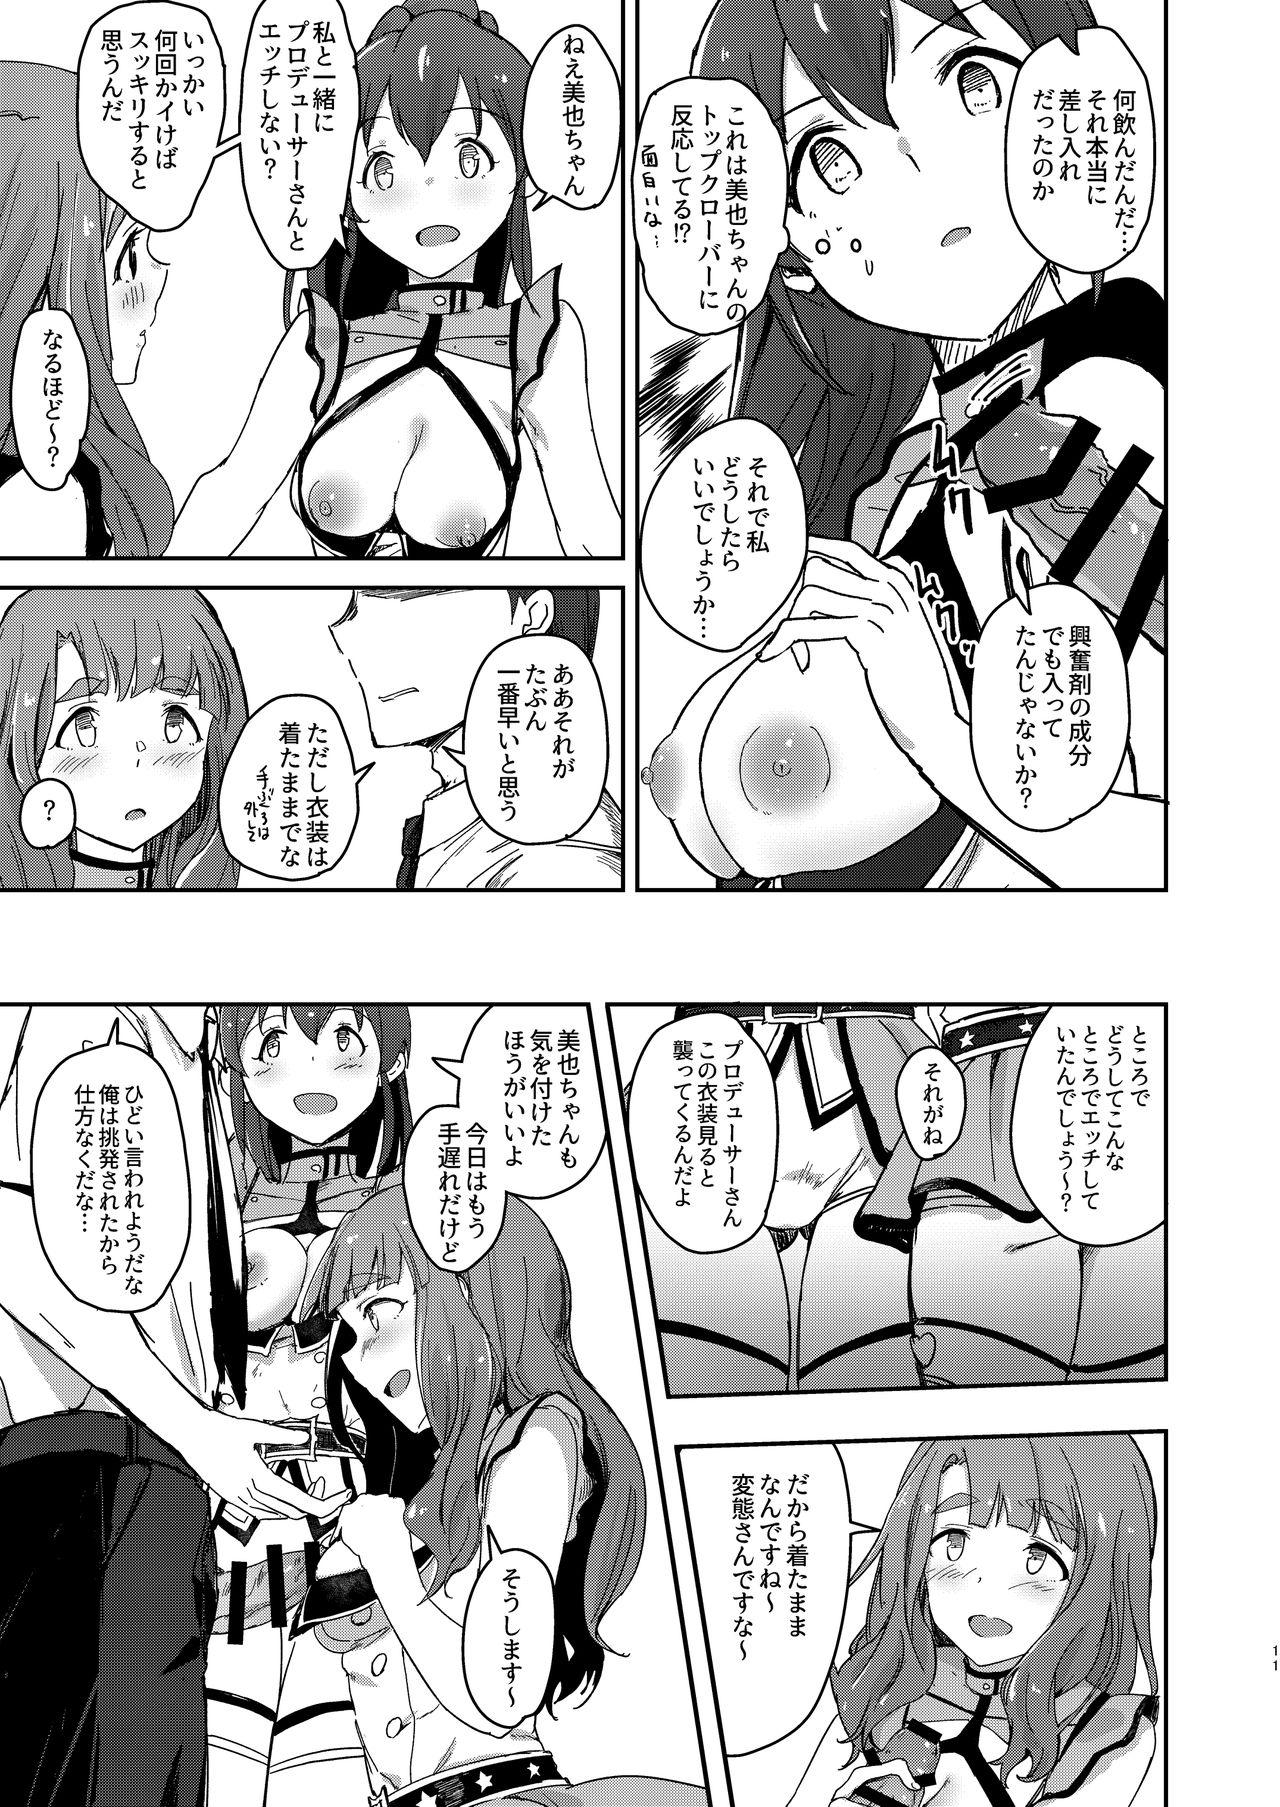 Gangbang TOP! CLOVER BOOK + omake - The idolmaster Indonesian - Page 10